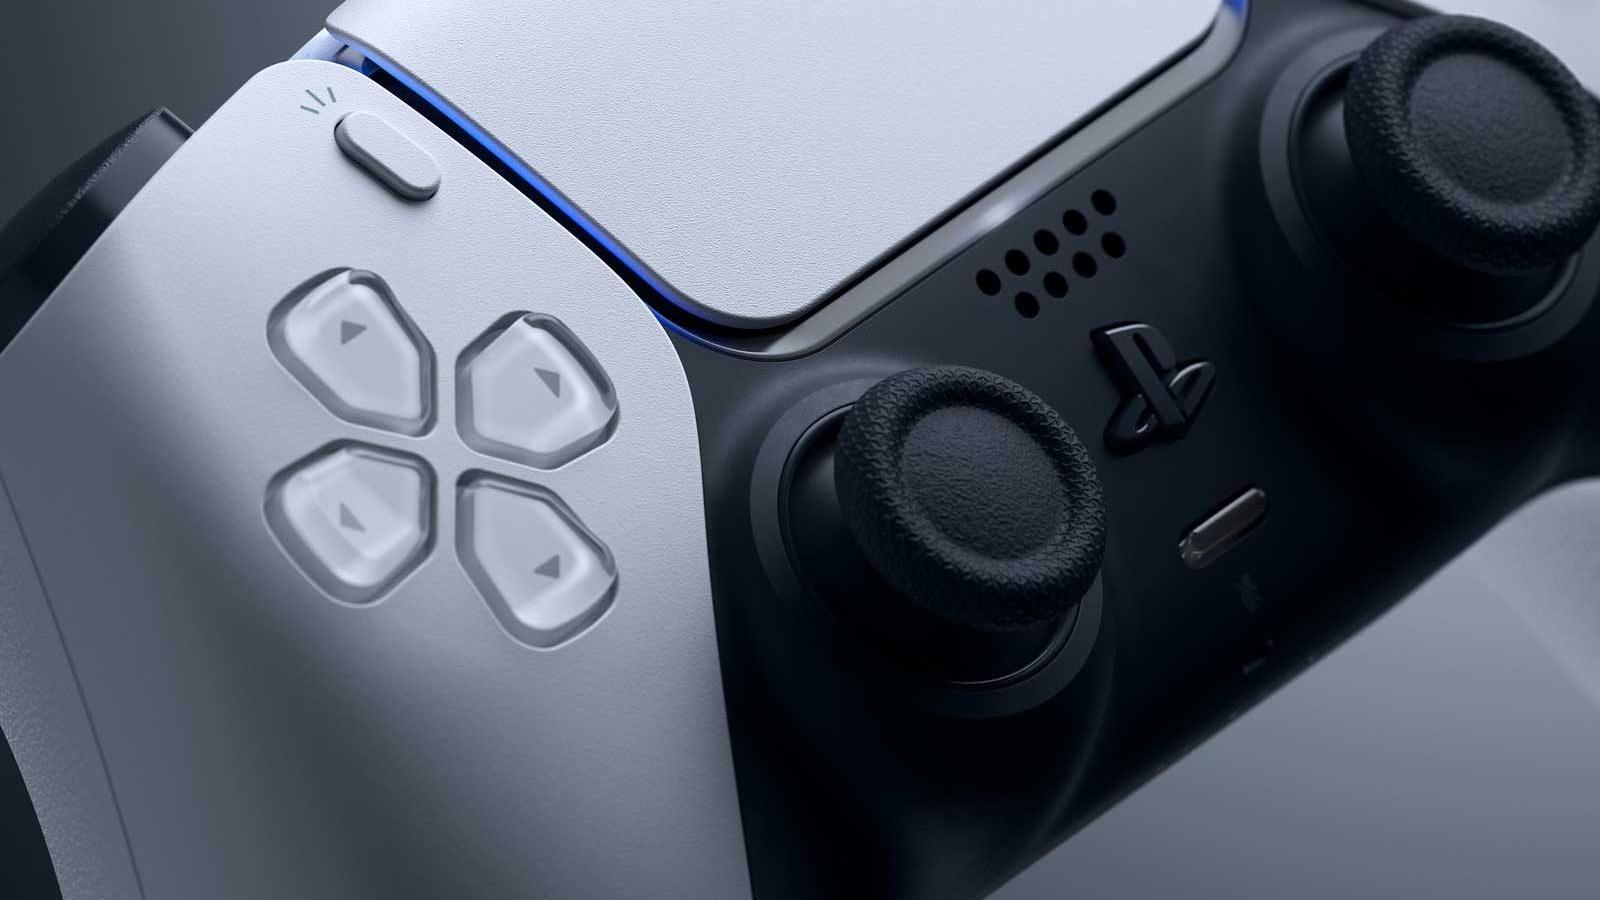 PlayStation 5 may drop in price soon as console revamp rumors rise